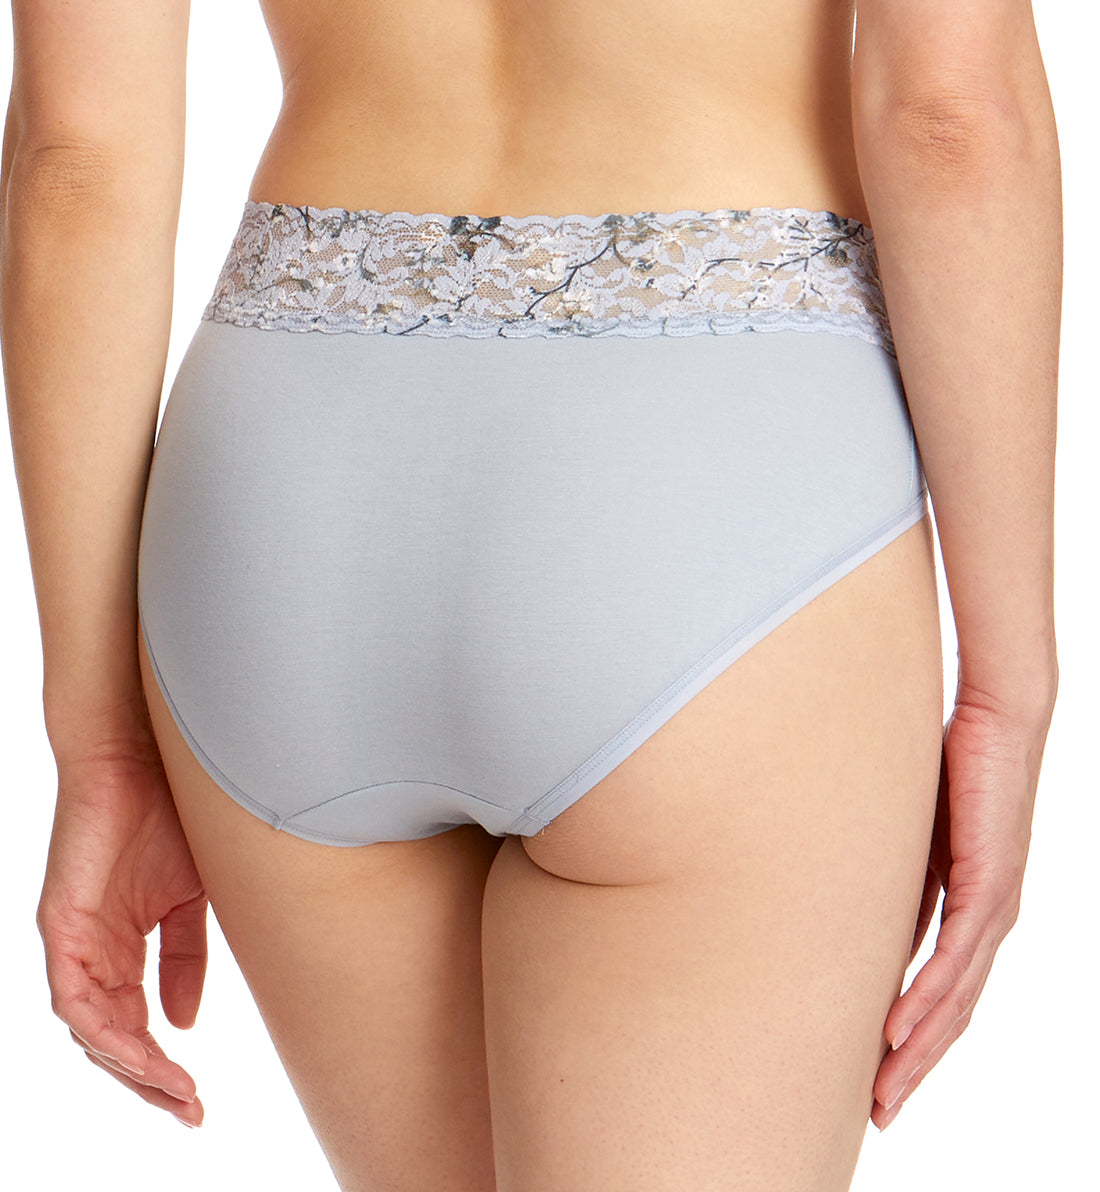 Hanky Panky Cotton-Spandex French Brief (892441),Small,Dove Grey/Misty Meadow - Dove Grey/Misty Meadow,Small